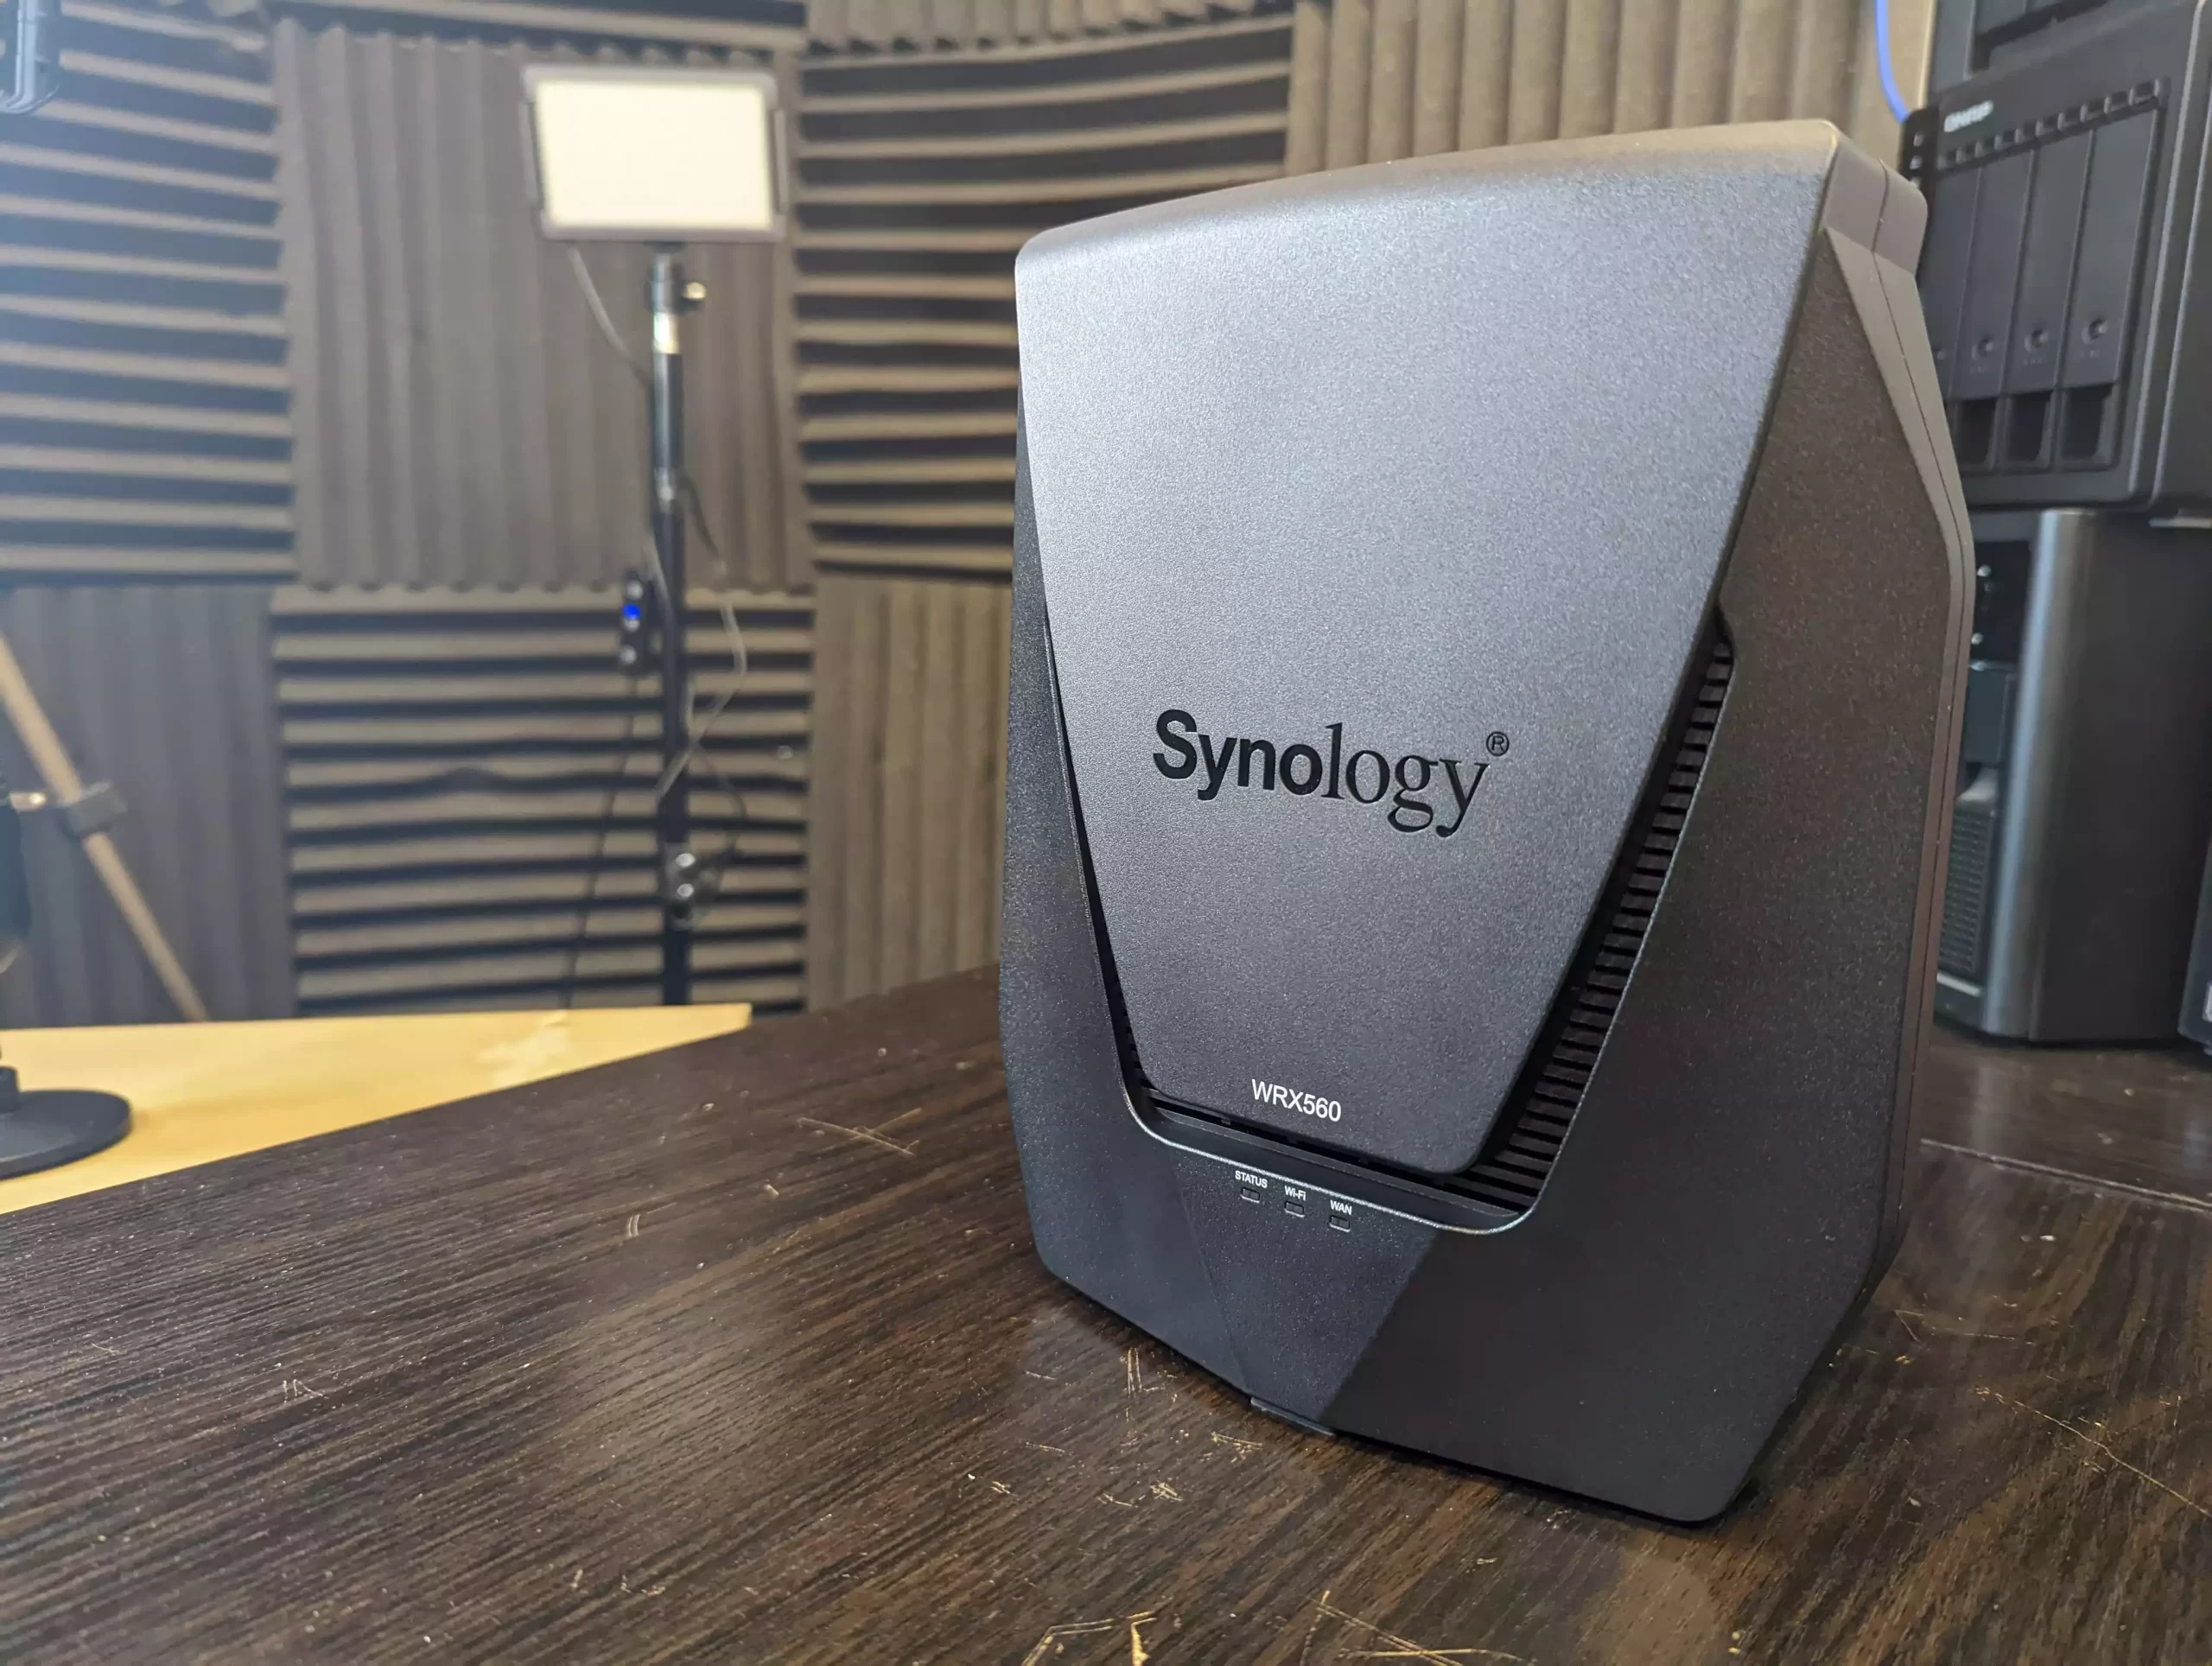 Synology WRX560 Router Review – NAS Compares